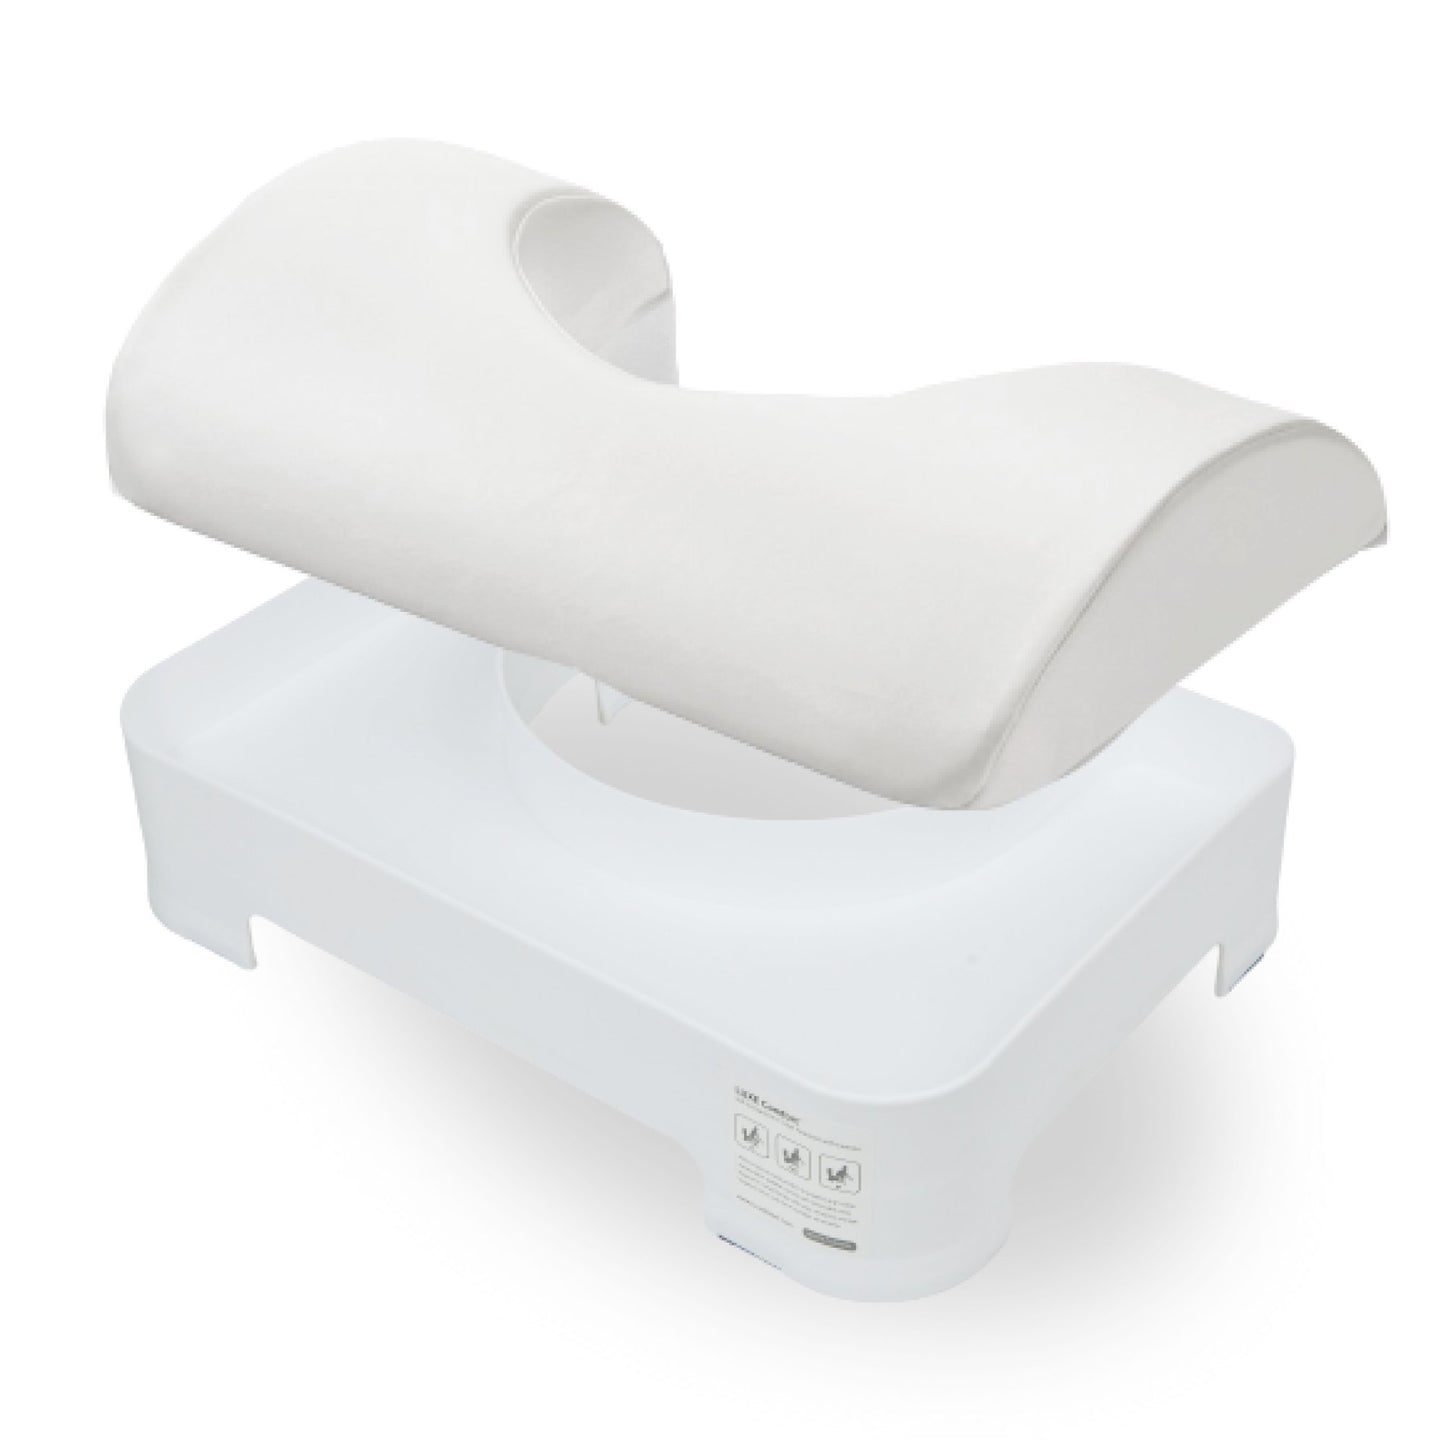 LUXE Footstool comes in two layers: a top cushioned foam layer with a white leather cover and a bottom white plastic base